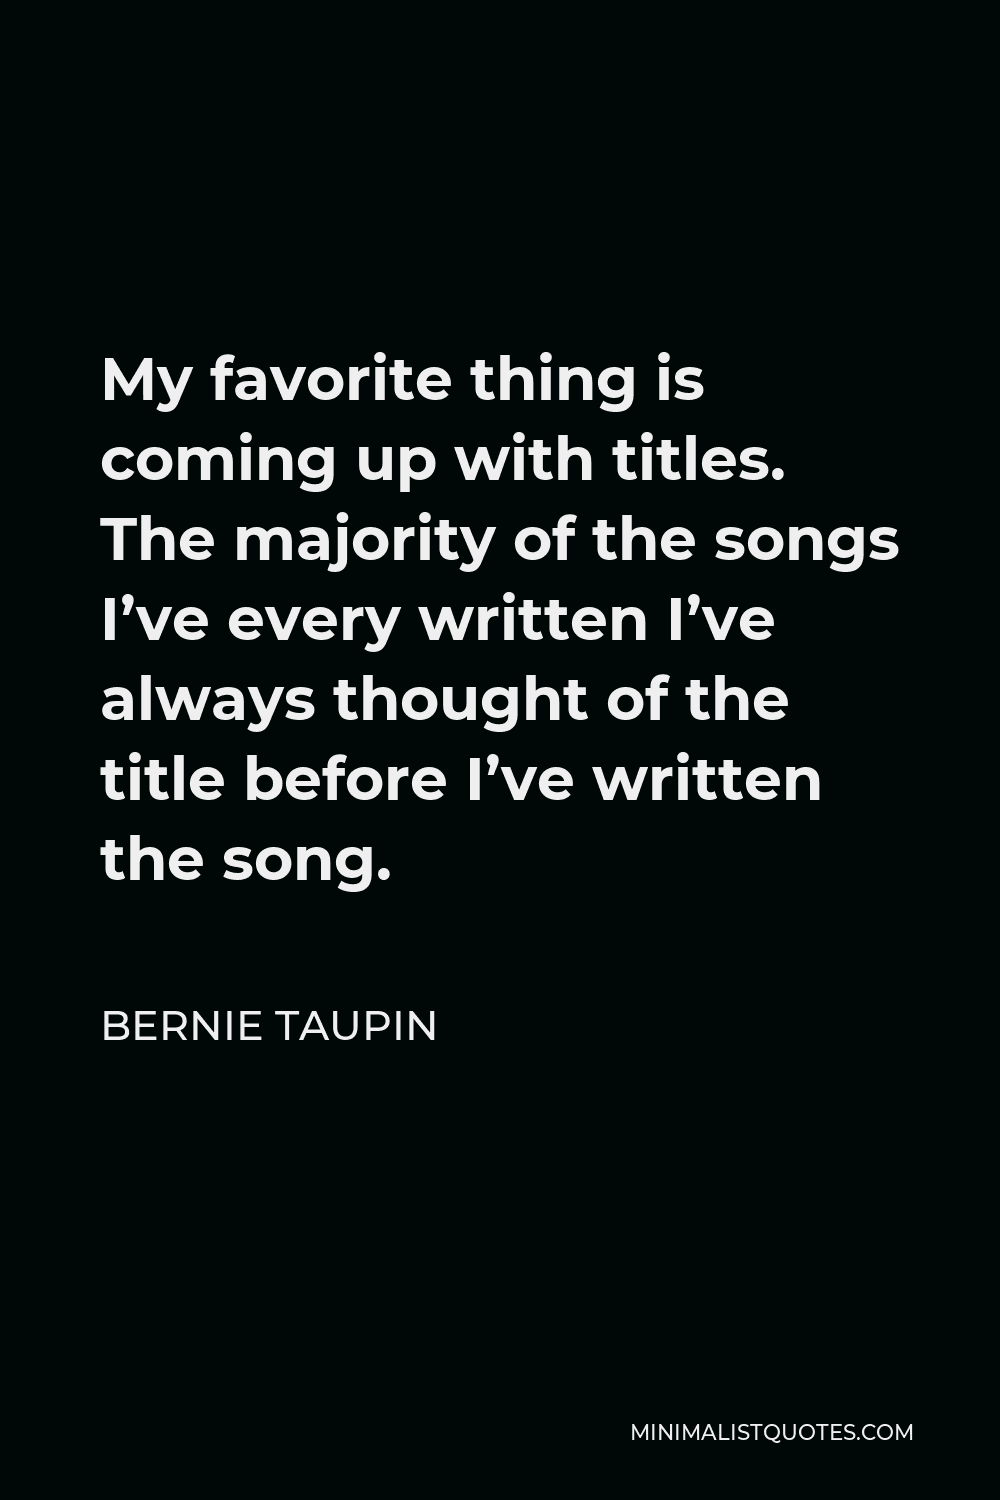 Bernie Taupin Quote - My favorite thing is coming up with titles. The majority of the songs I’ve every written I’ve always thought of the title before I’ve written the song.